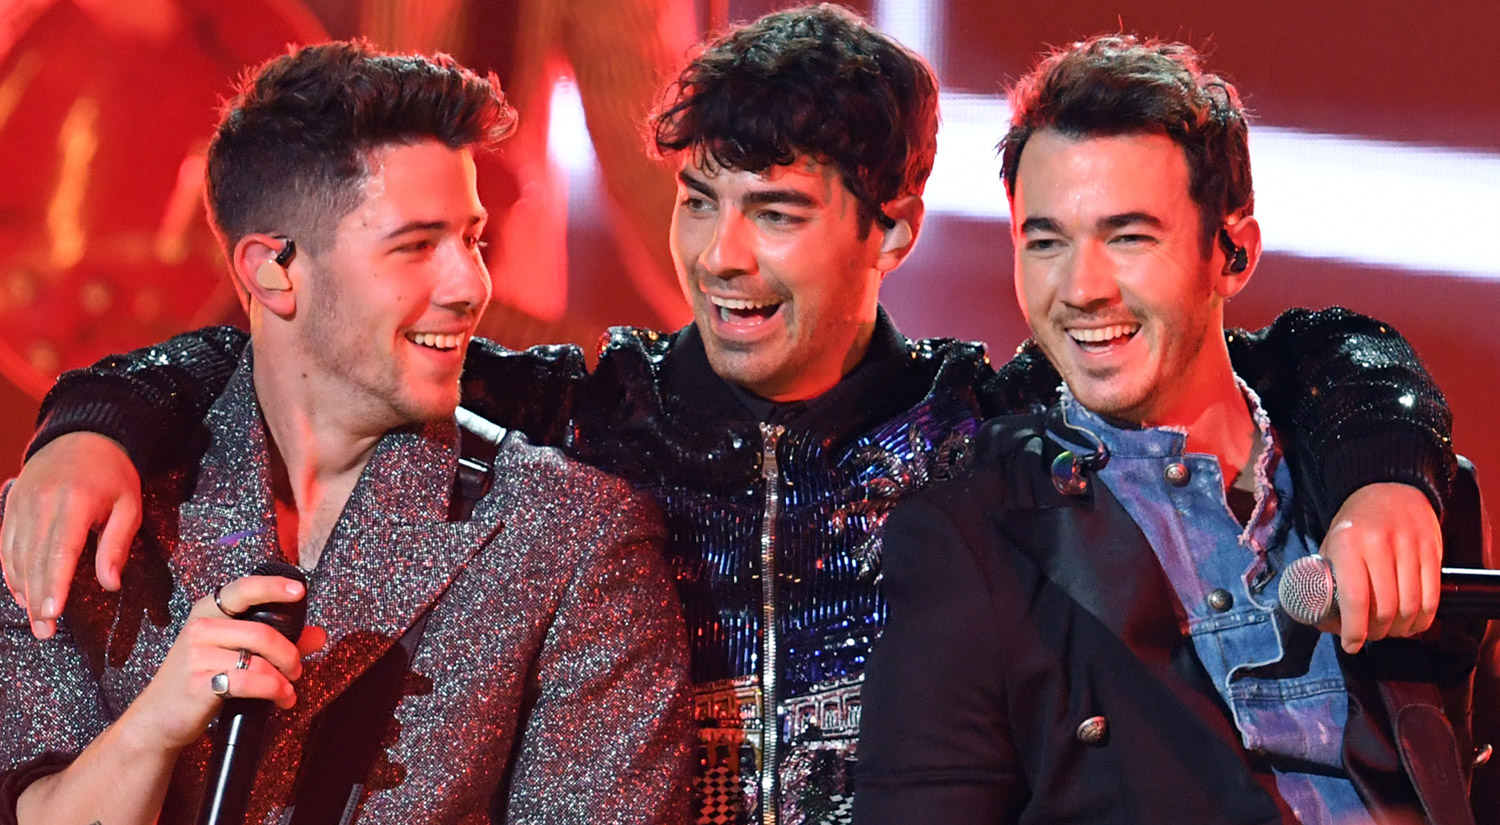 Jonas Brothers Release New Song with Marshmello, ‘Leave Before You Love Me’ – Listen Now!